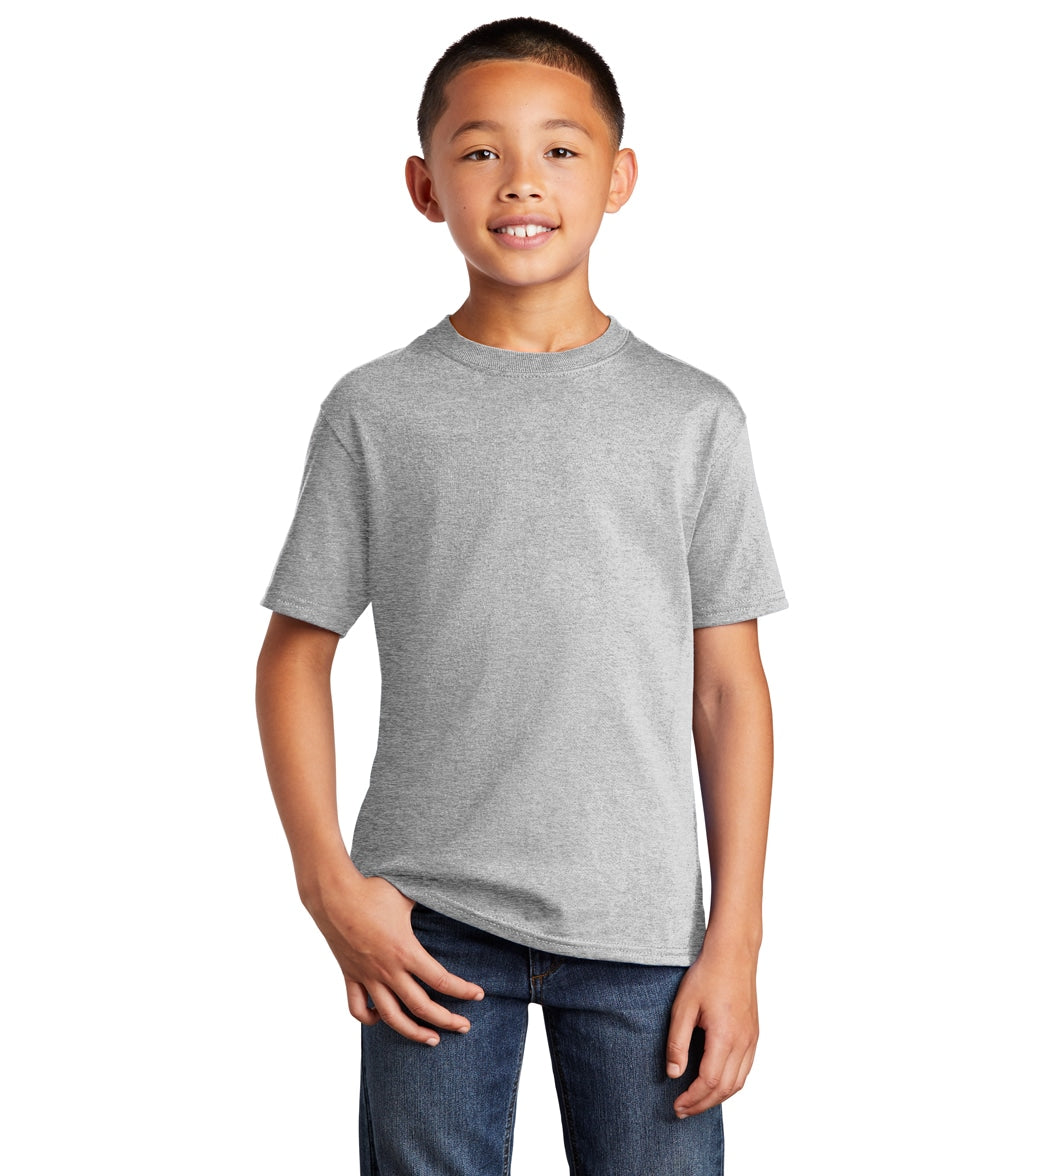 SwimOutlet Youth Core Cotton Short Sleeve Tee